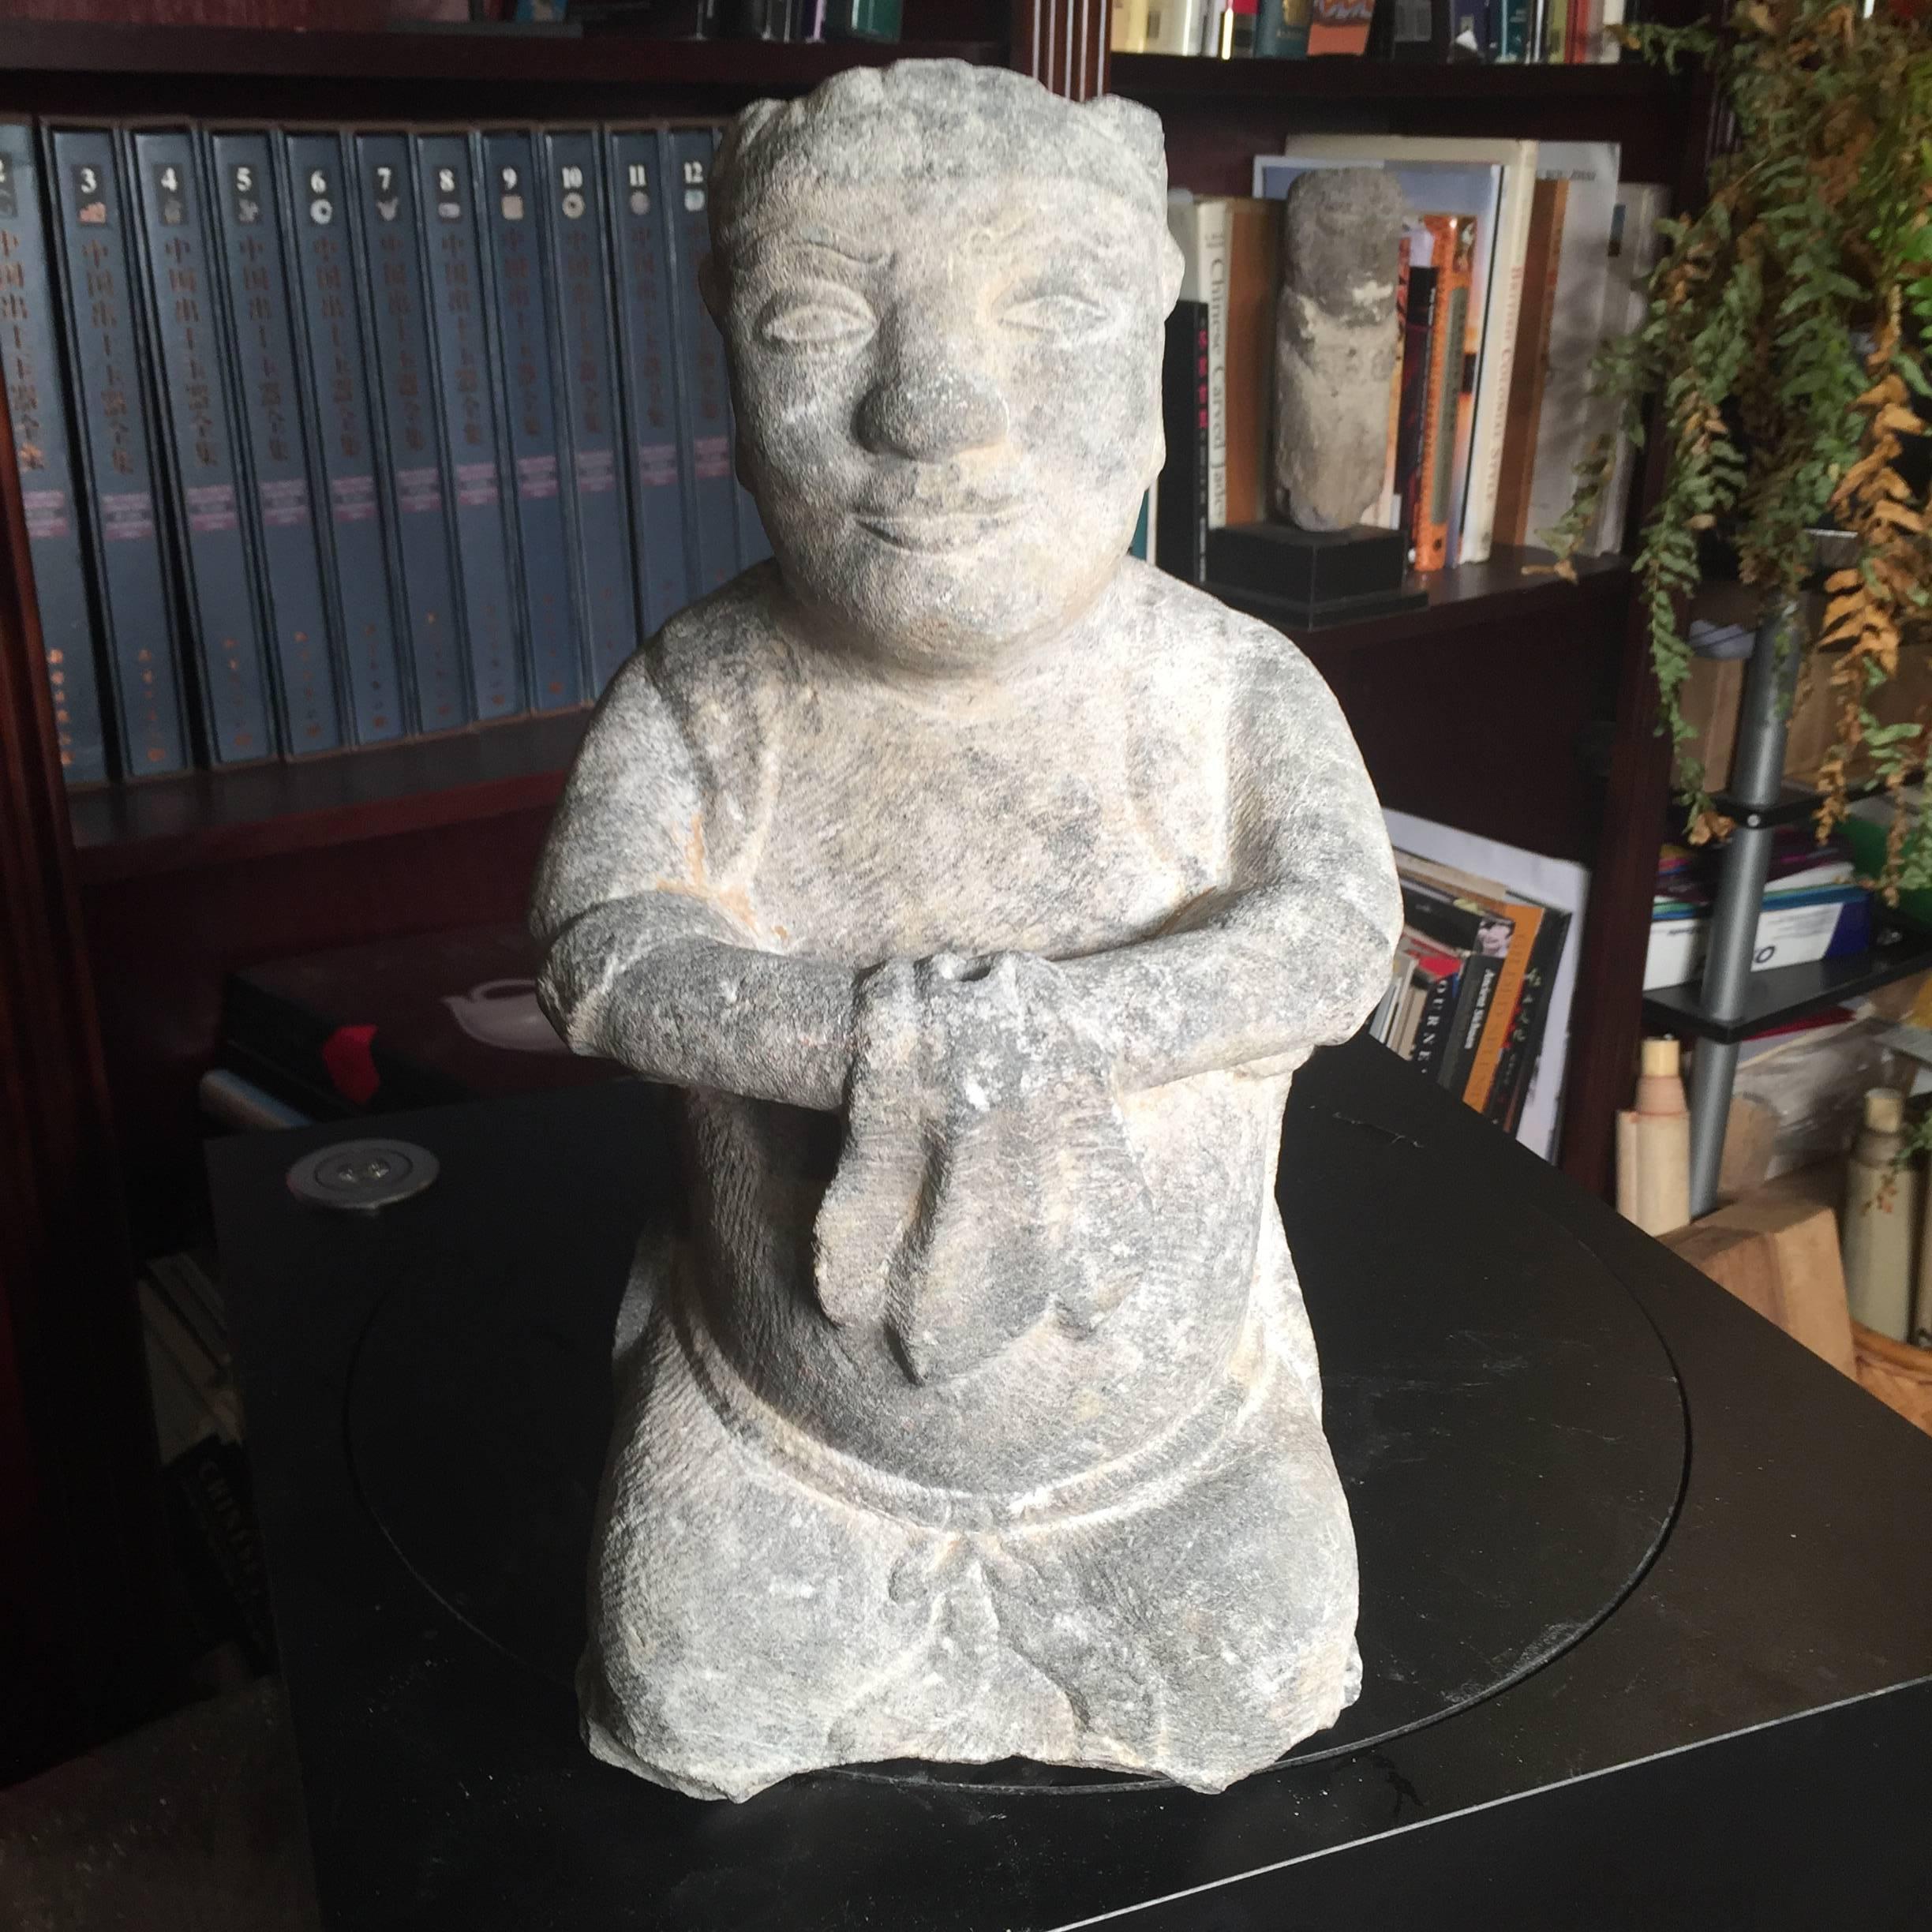 China, a large hand carved effigy of a seated attendant, limestone, Qing dynasty 1644-1912. 

Dimensions: 15.5 inches tall and 7.5 inches wide and 5.5 inches deep

The hand carved figure shown on its haunches with a naturalistic servitude